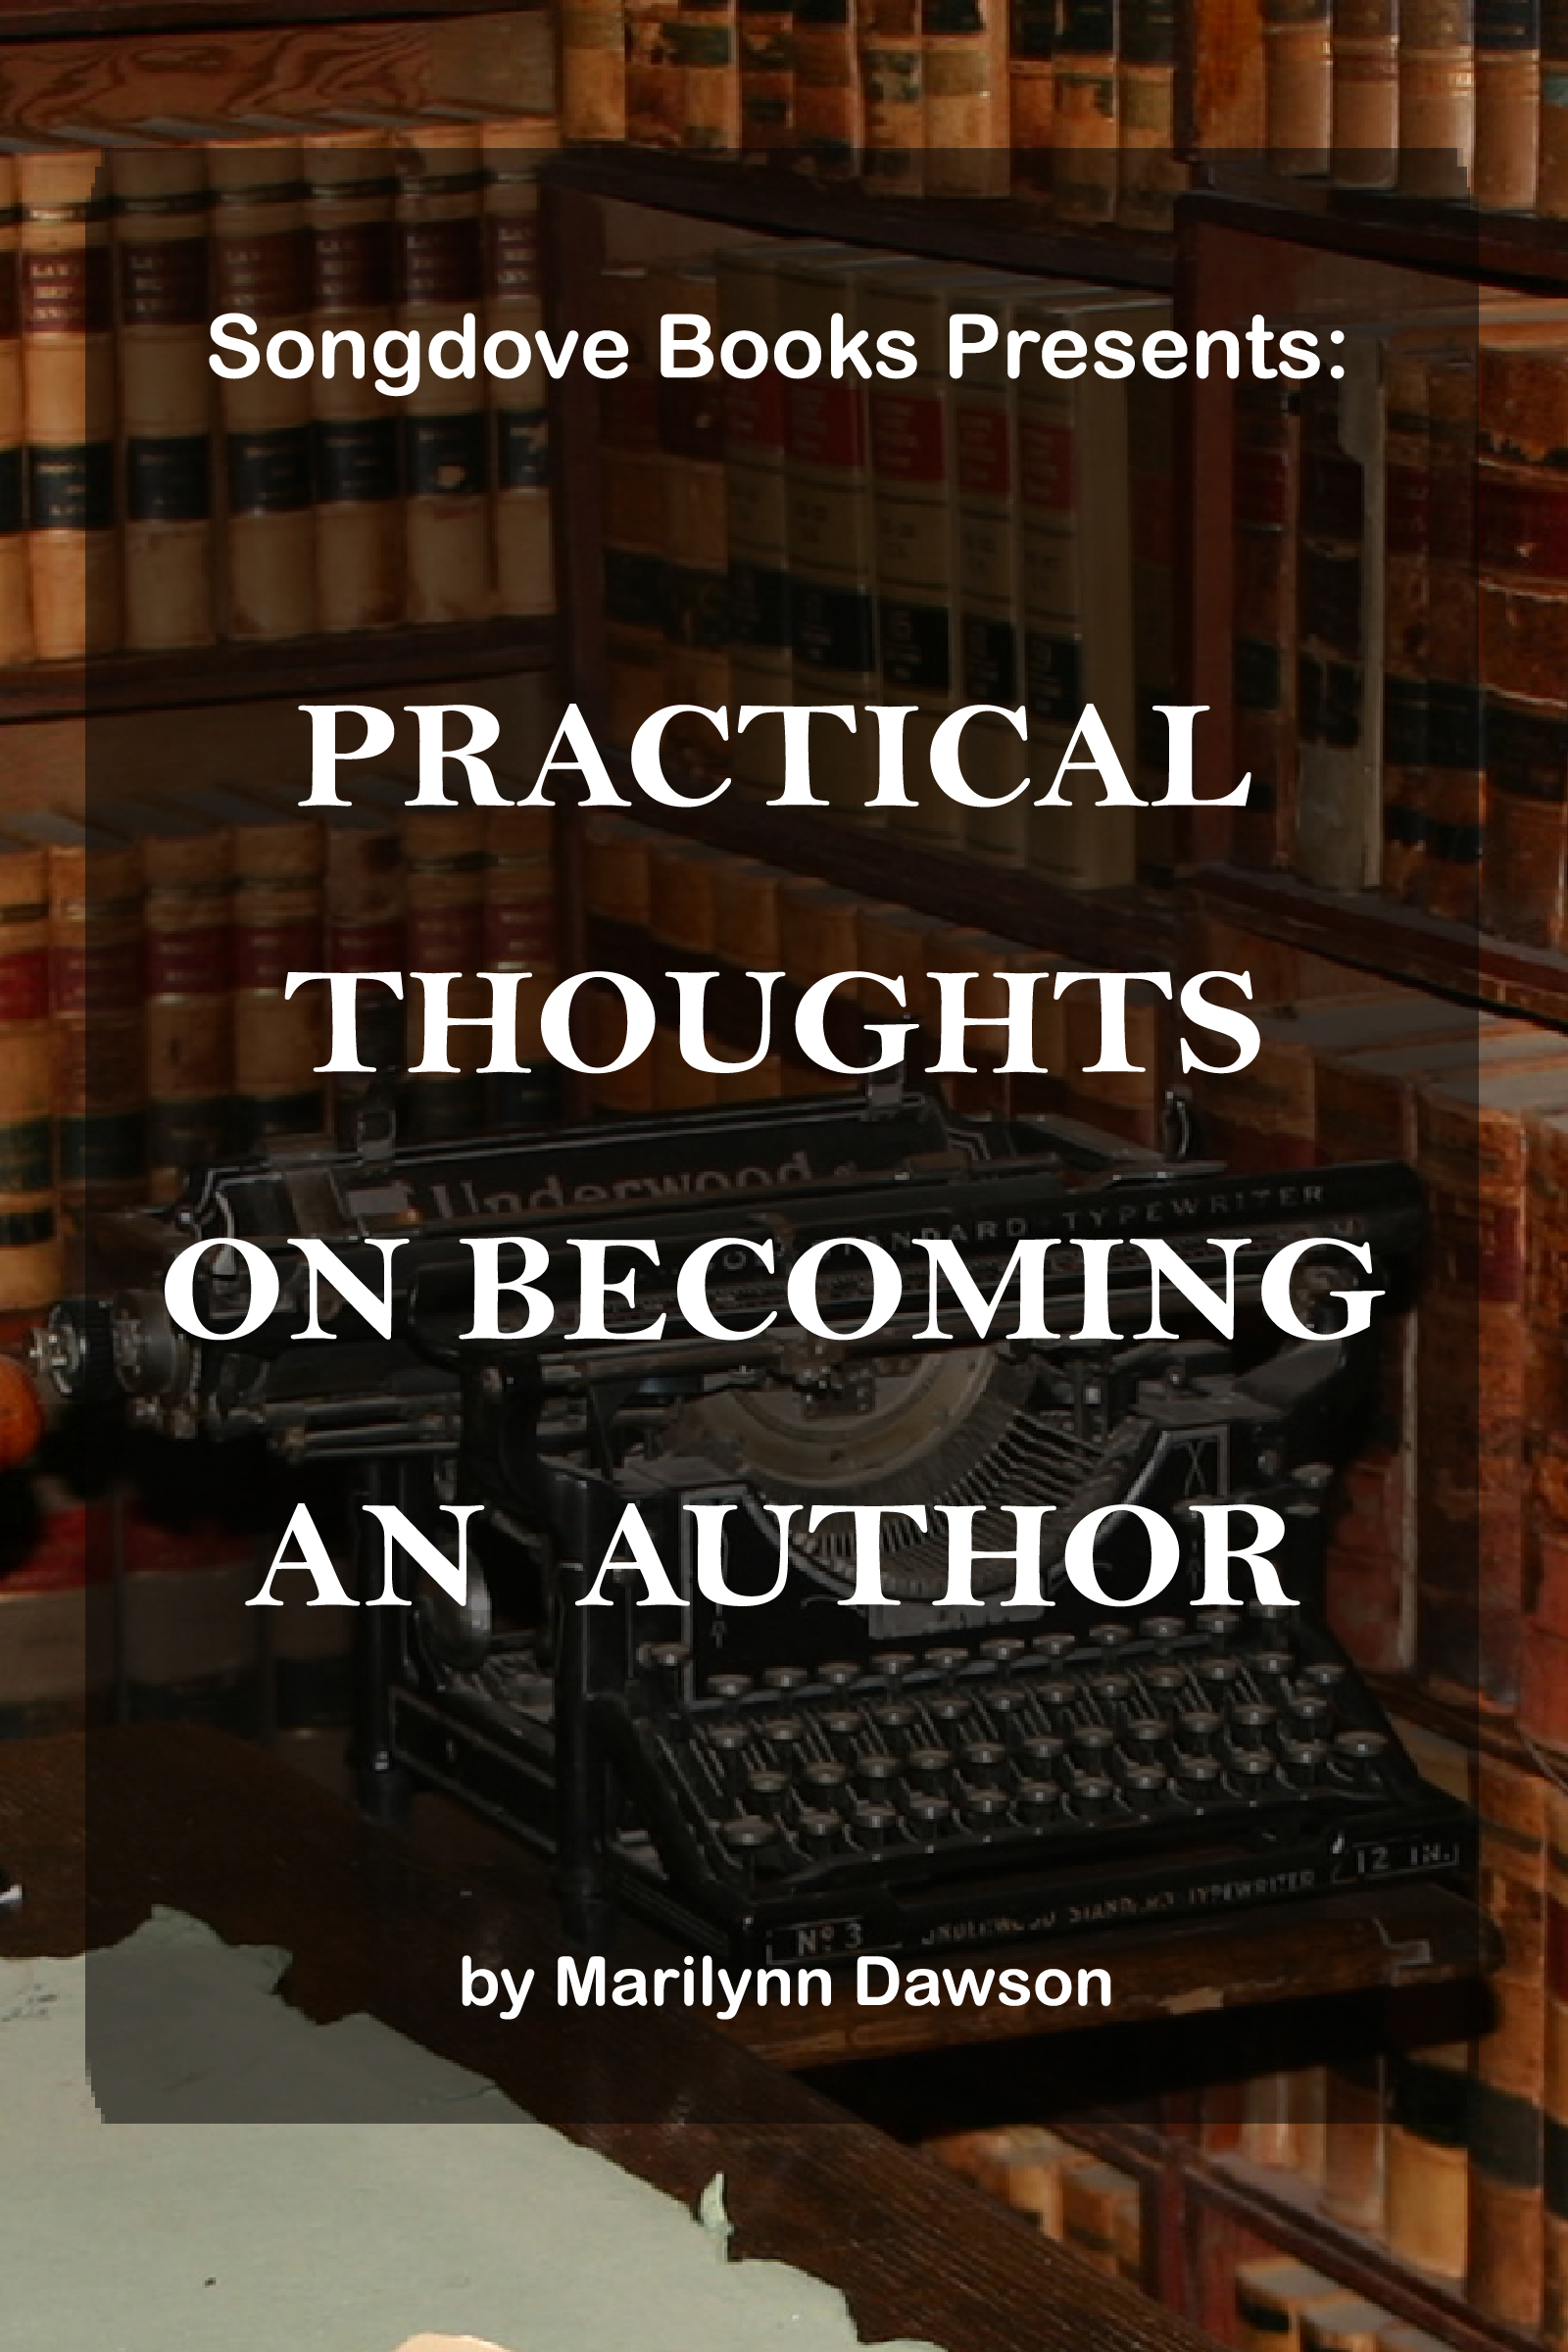 Songdove Books - Practical Thoughts on Becoming an Author